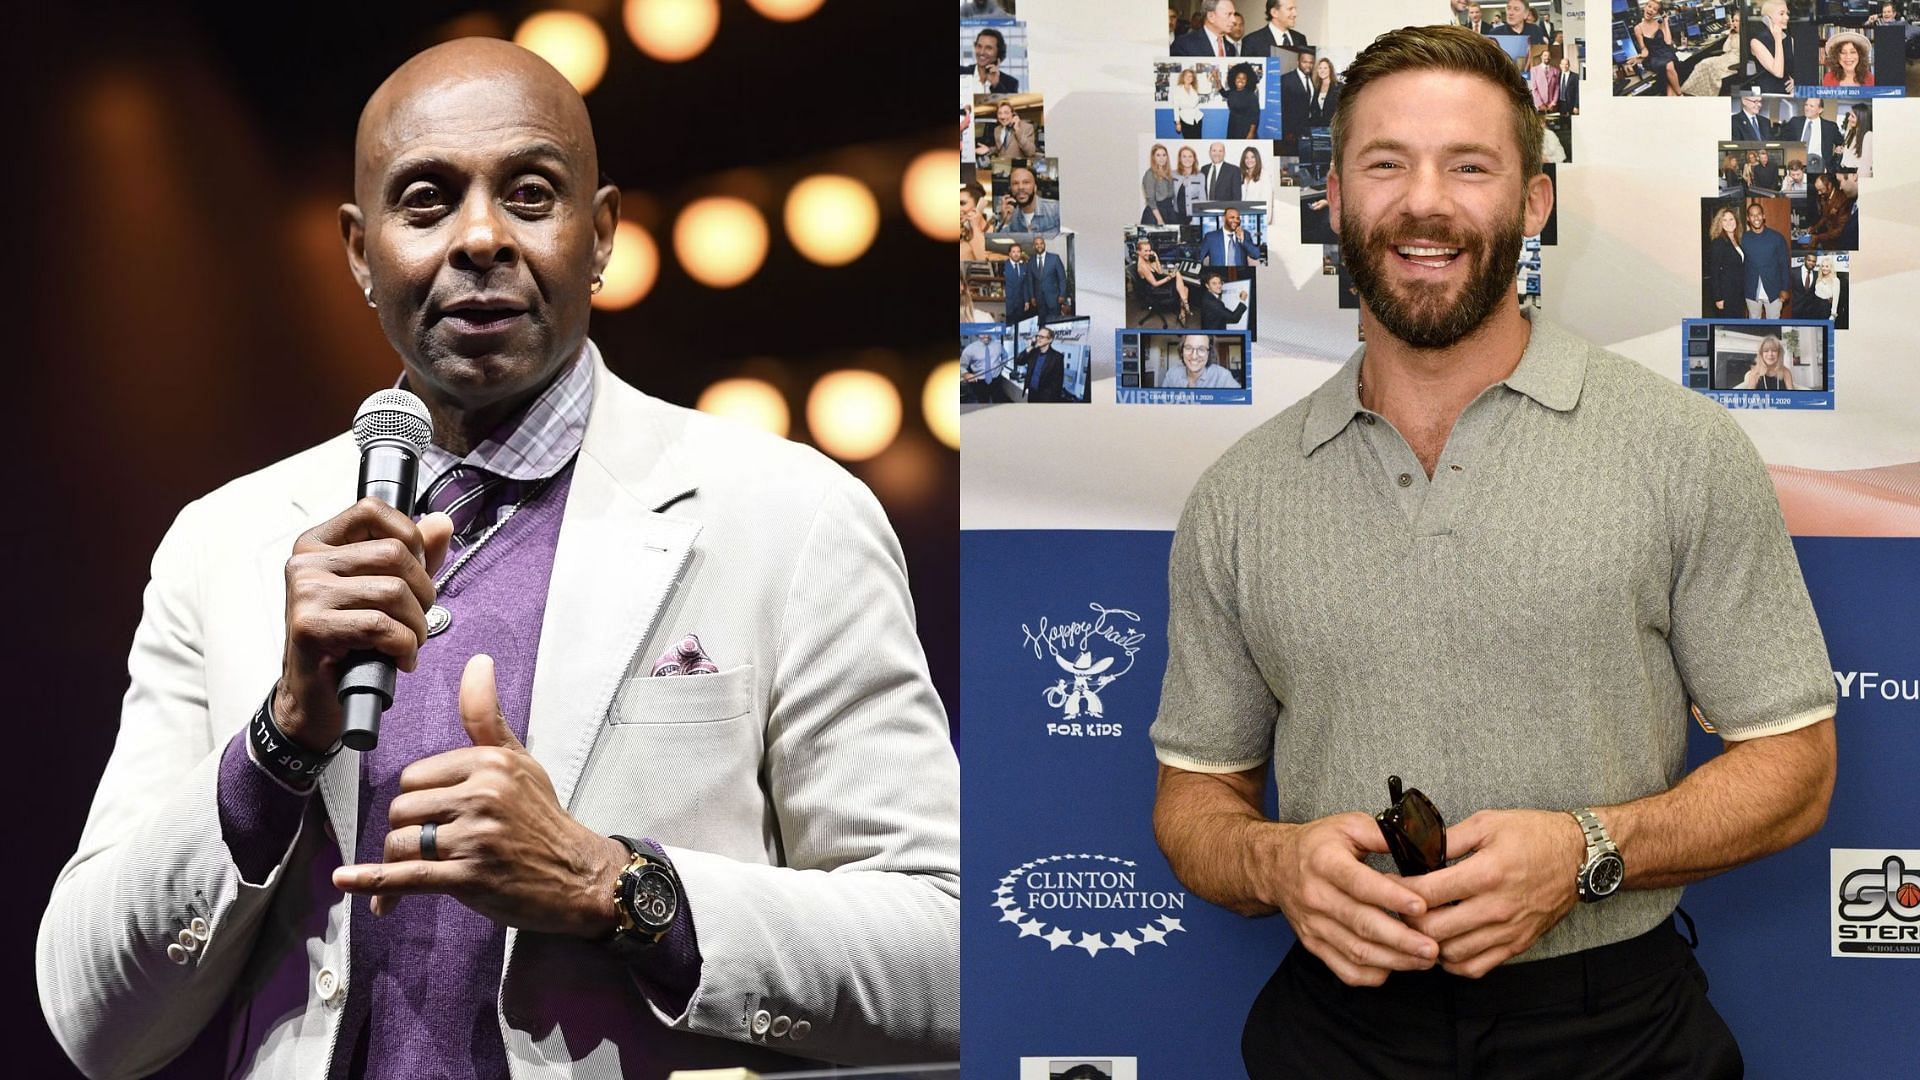 Jerry Rice shares a story about his daughter and Julian Edelman